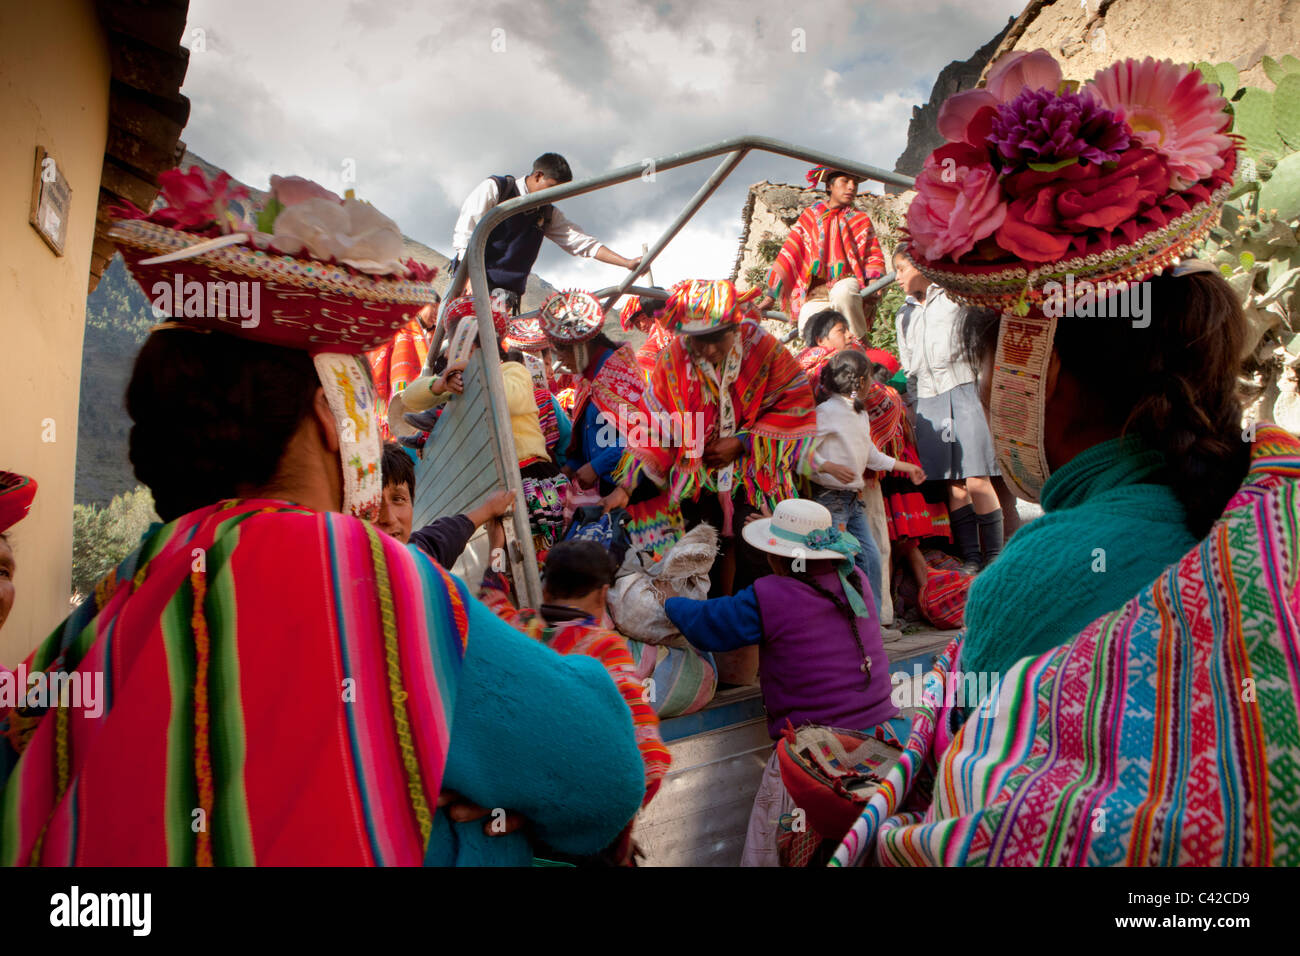 Peru, Ollantaytambo, Indian People from Patacancha or Patakancha in their traditional dress boarding a truck to go home. Stock Photo